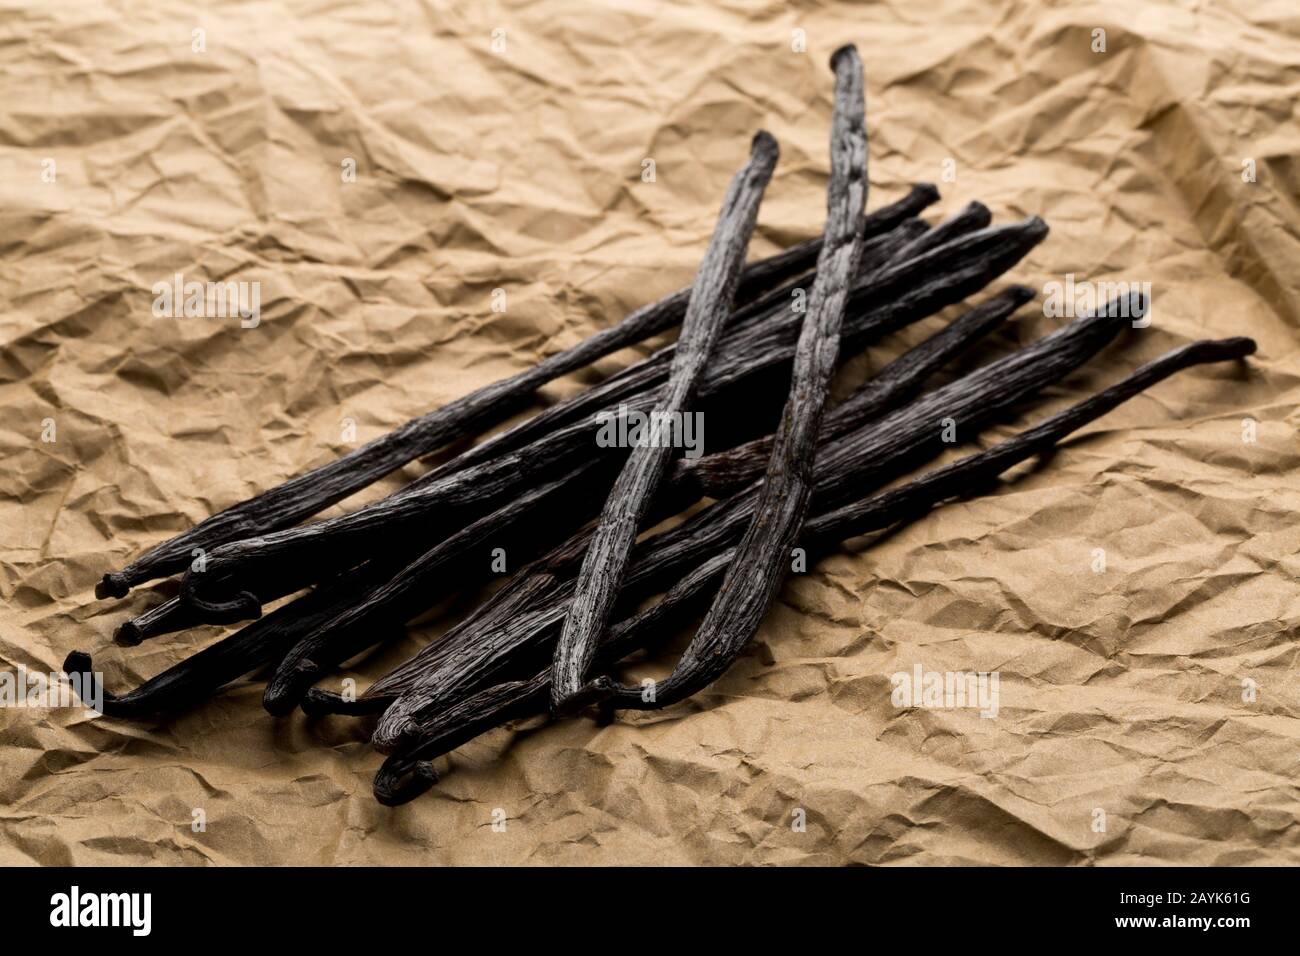 Bundle of dried bourbon vanilla beans or pods on brown packing paper flat lay top view from above Stock Photo